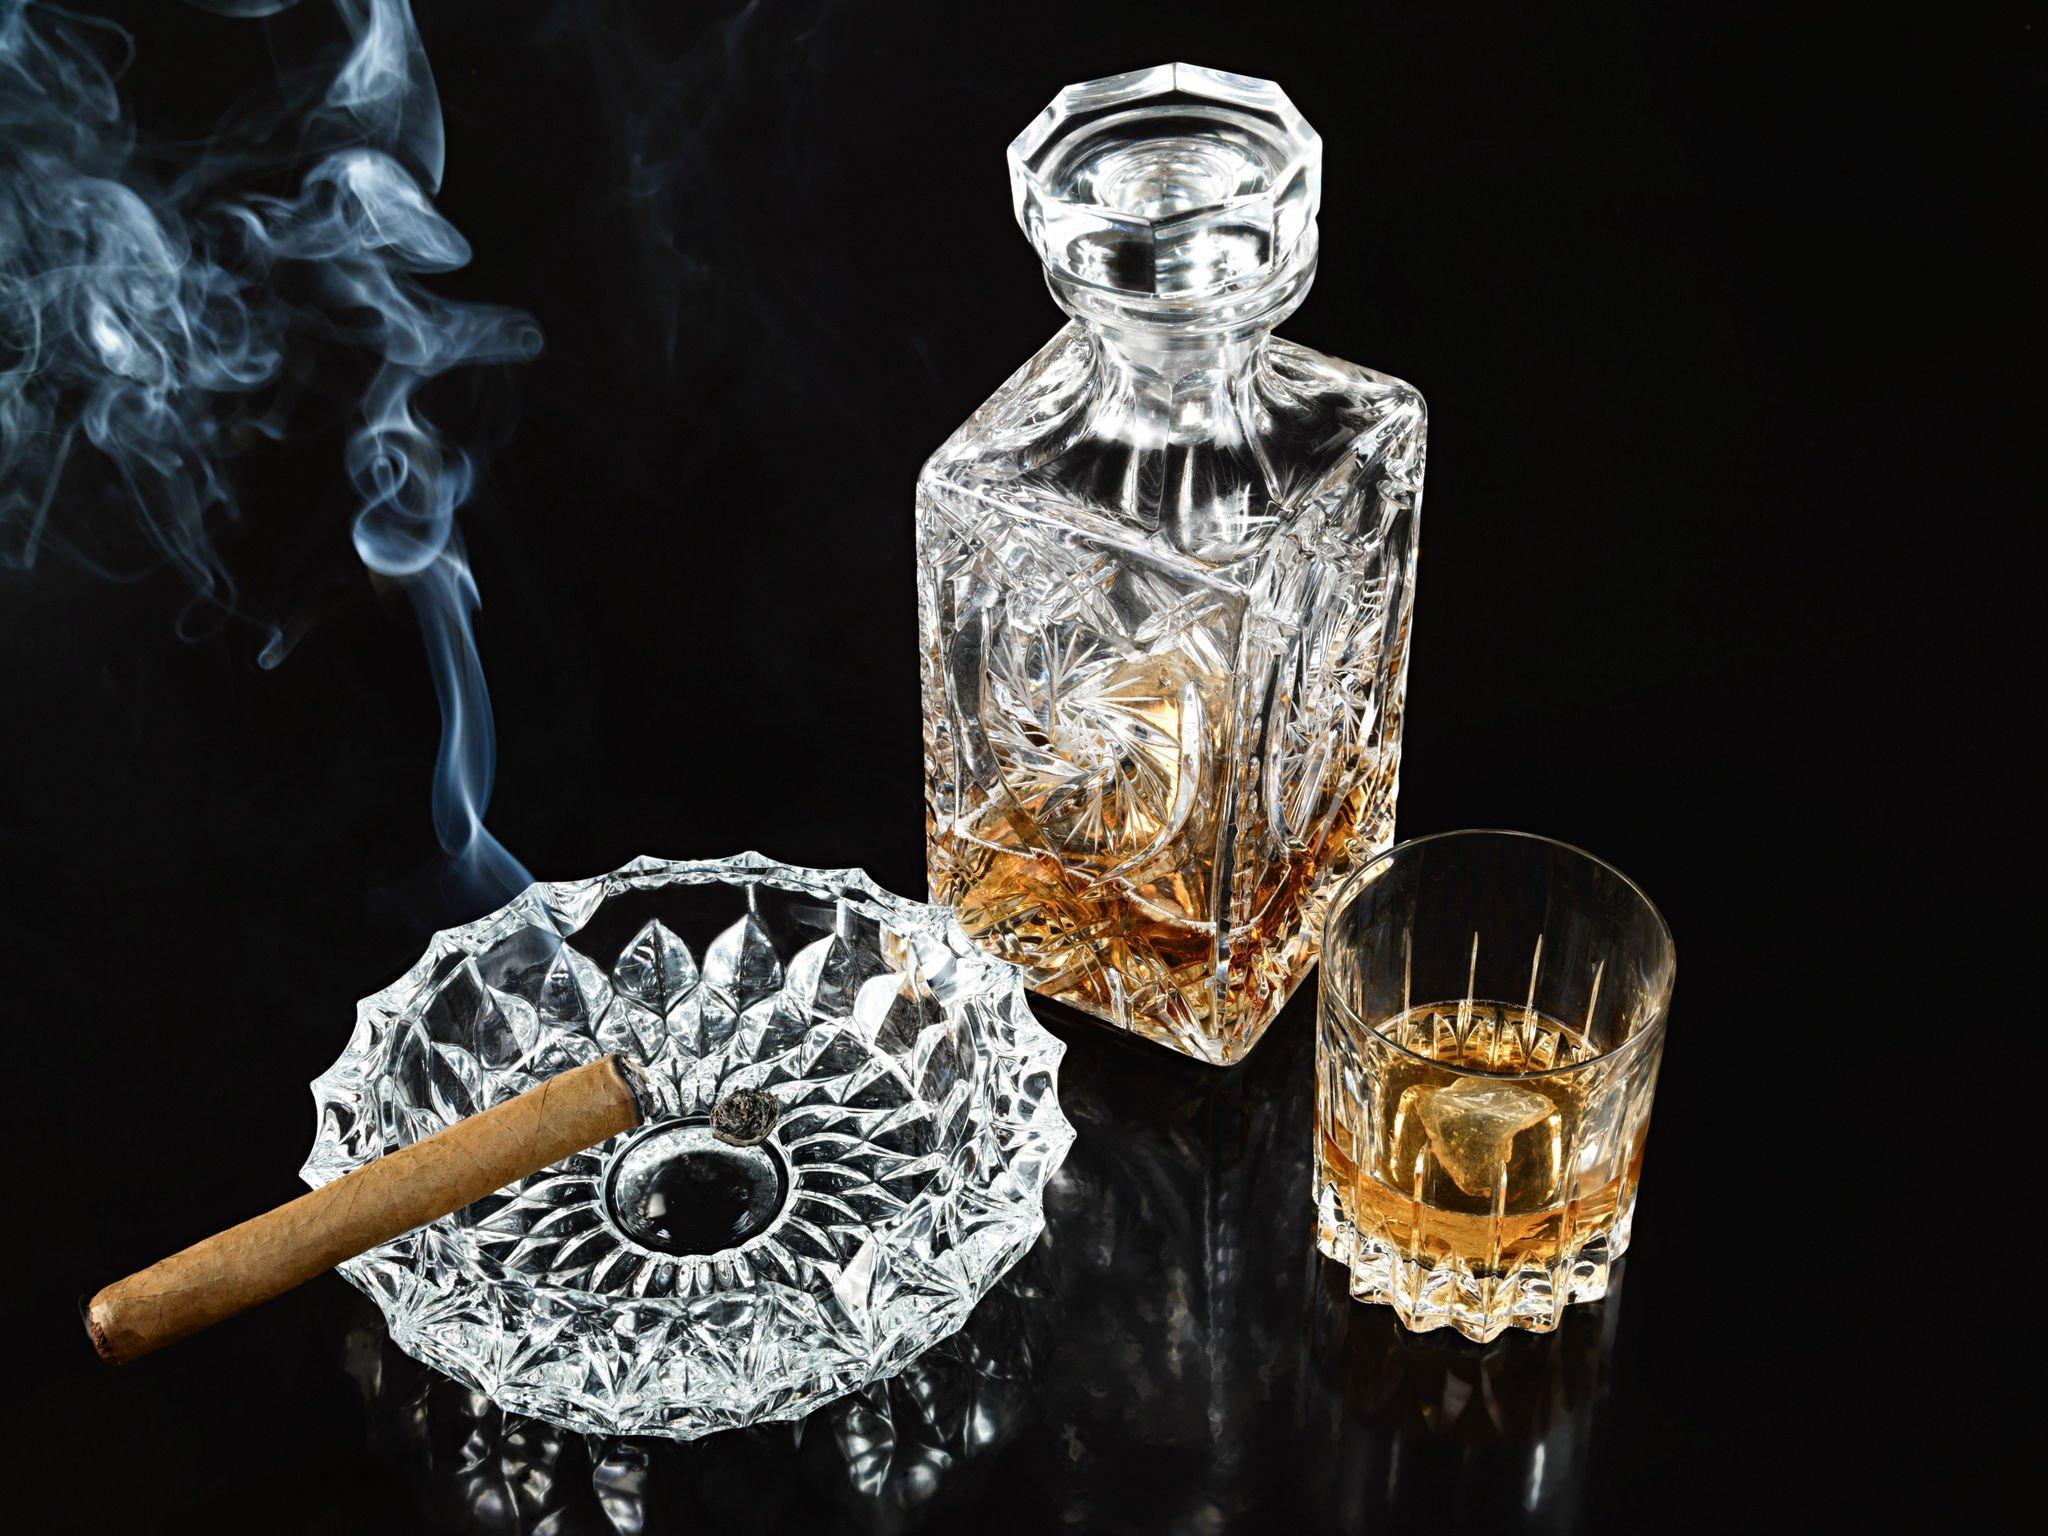 Cigar in ashtray with decanter and tumbler of whiskey